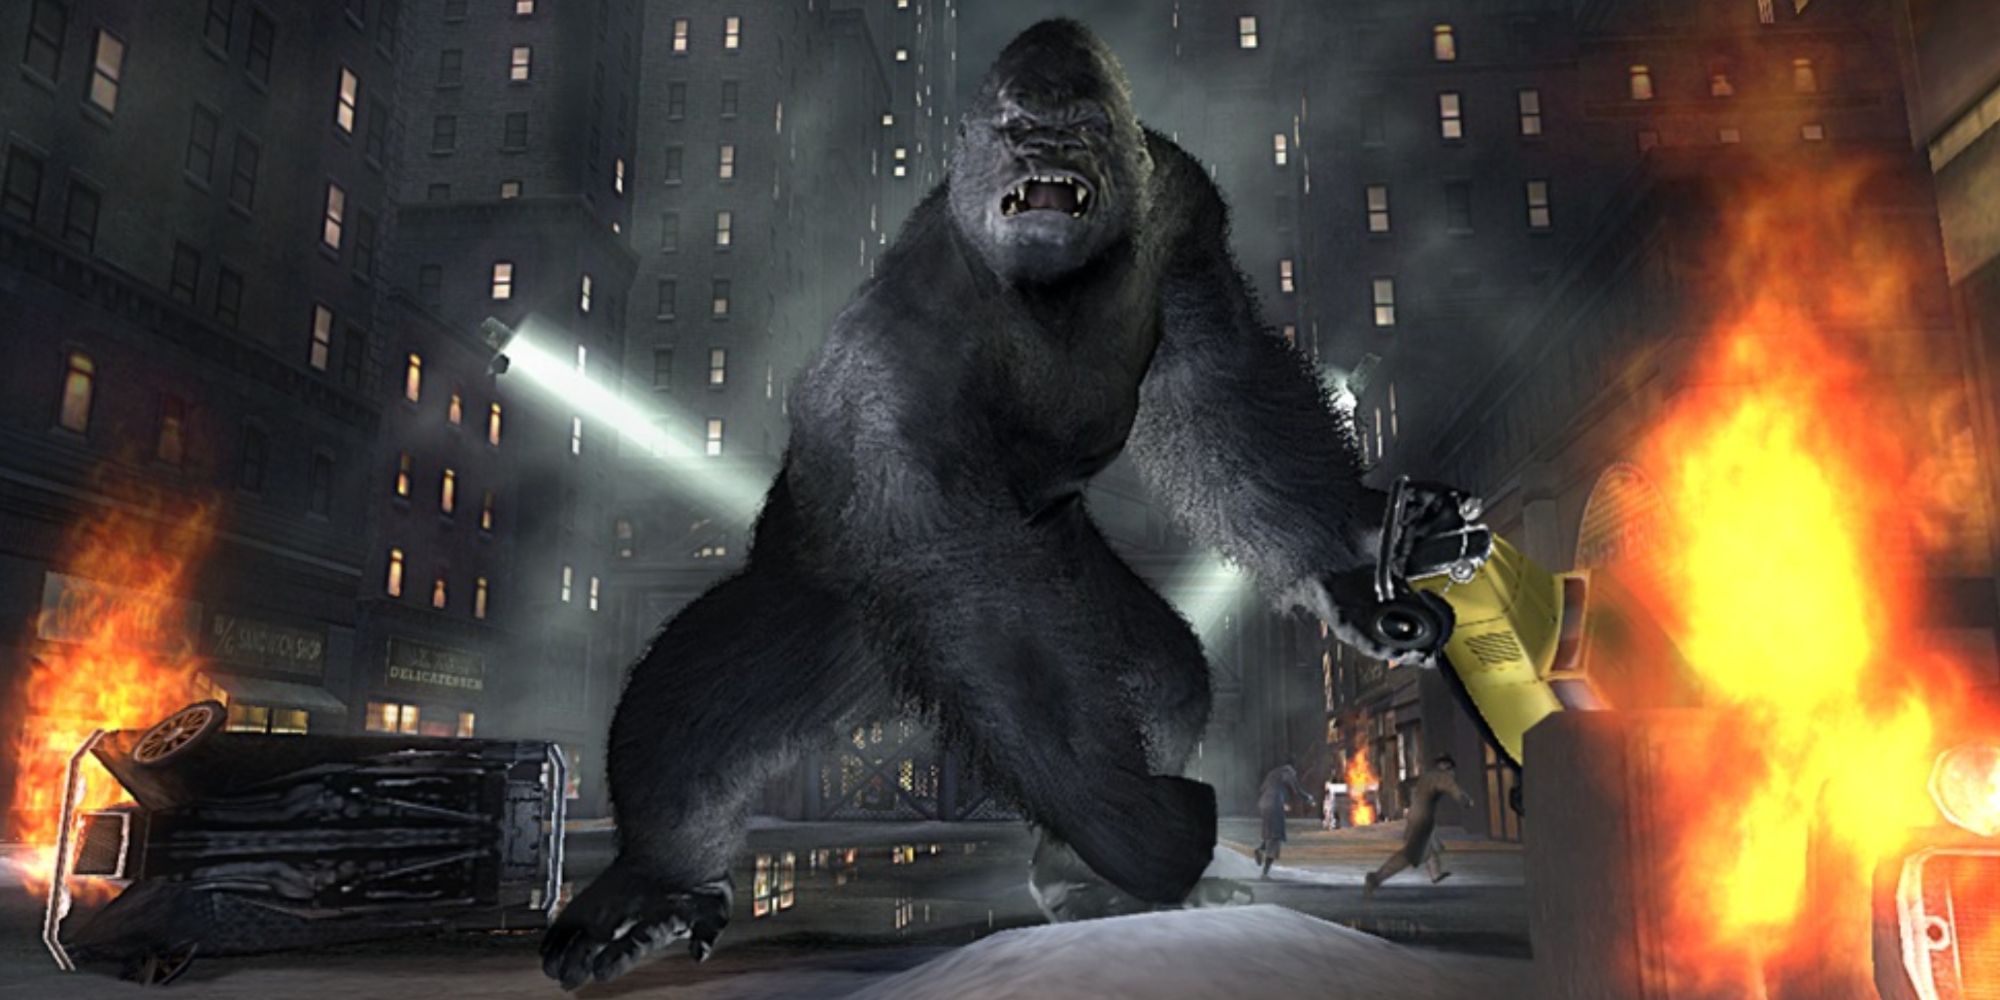 King Kong destroying cars in New York in Peter Jackson's King Kong